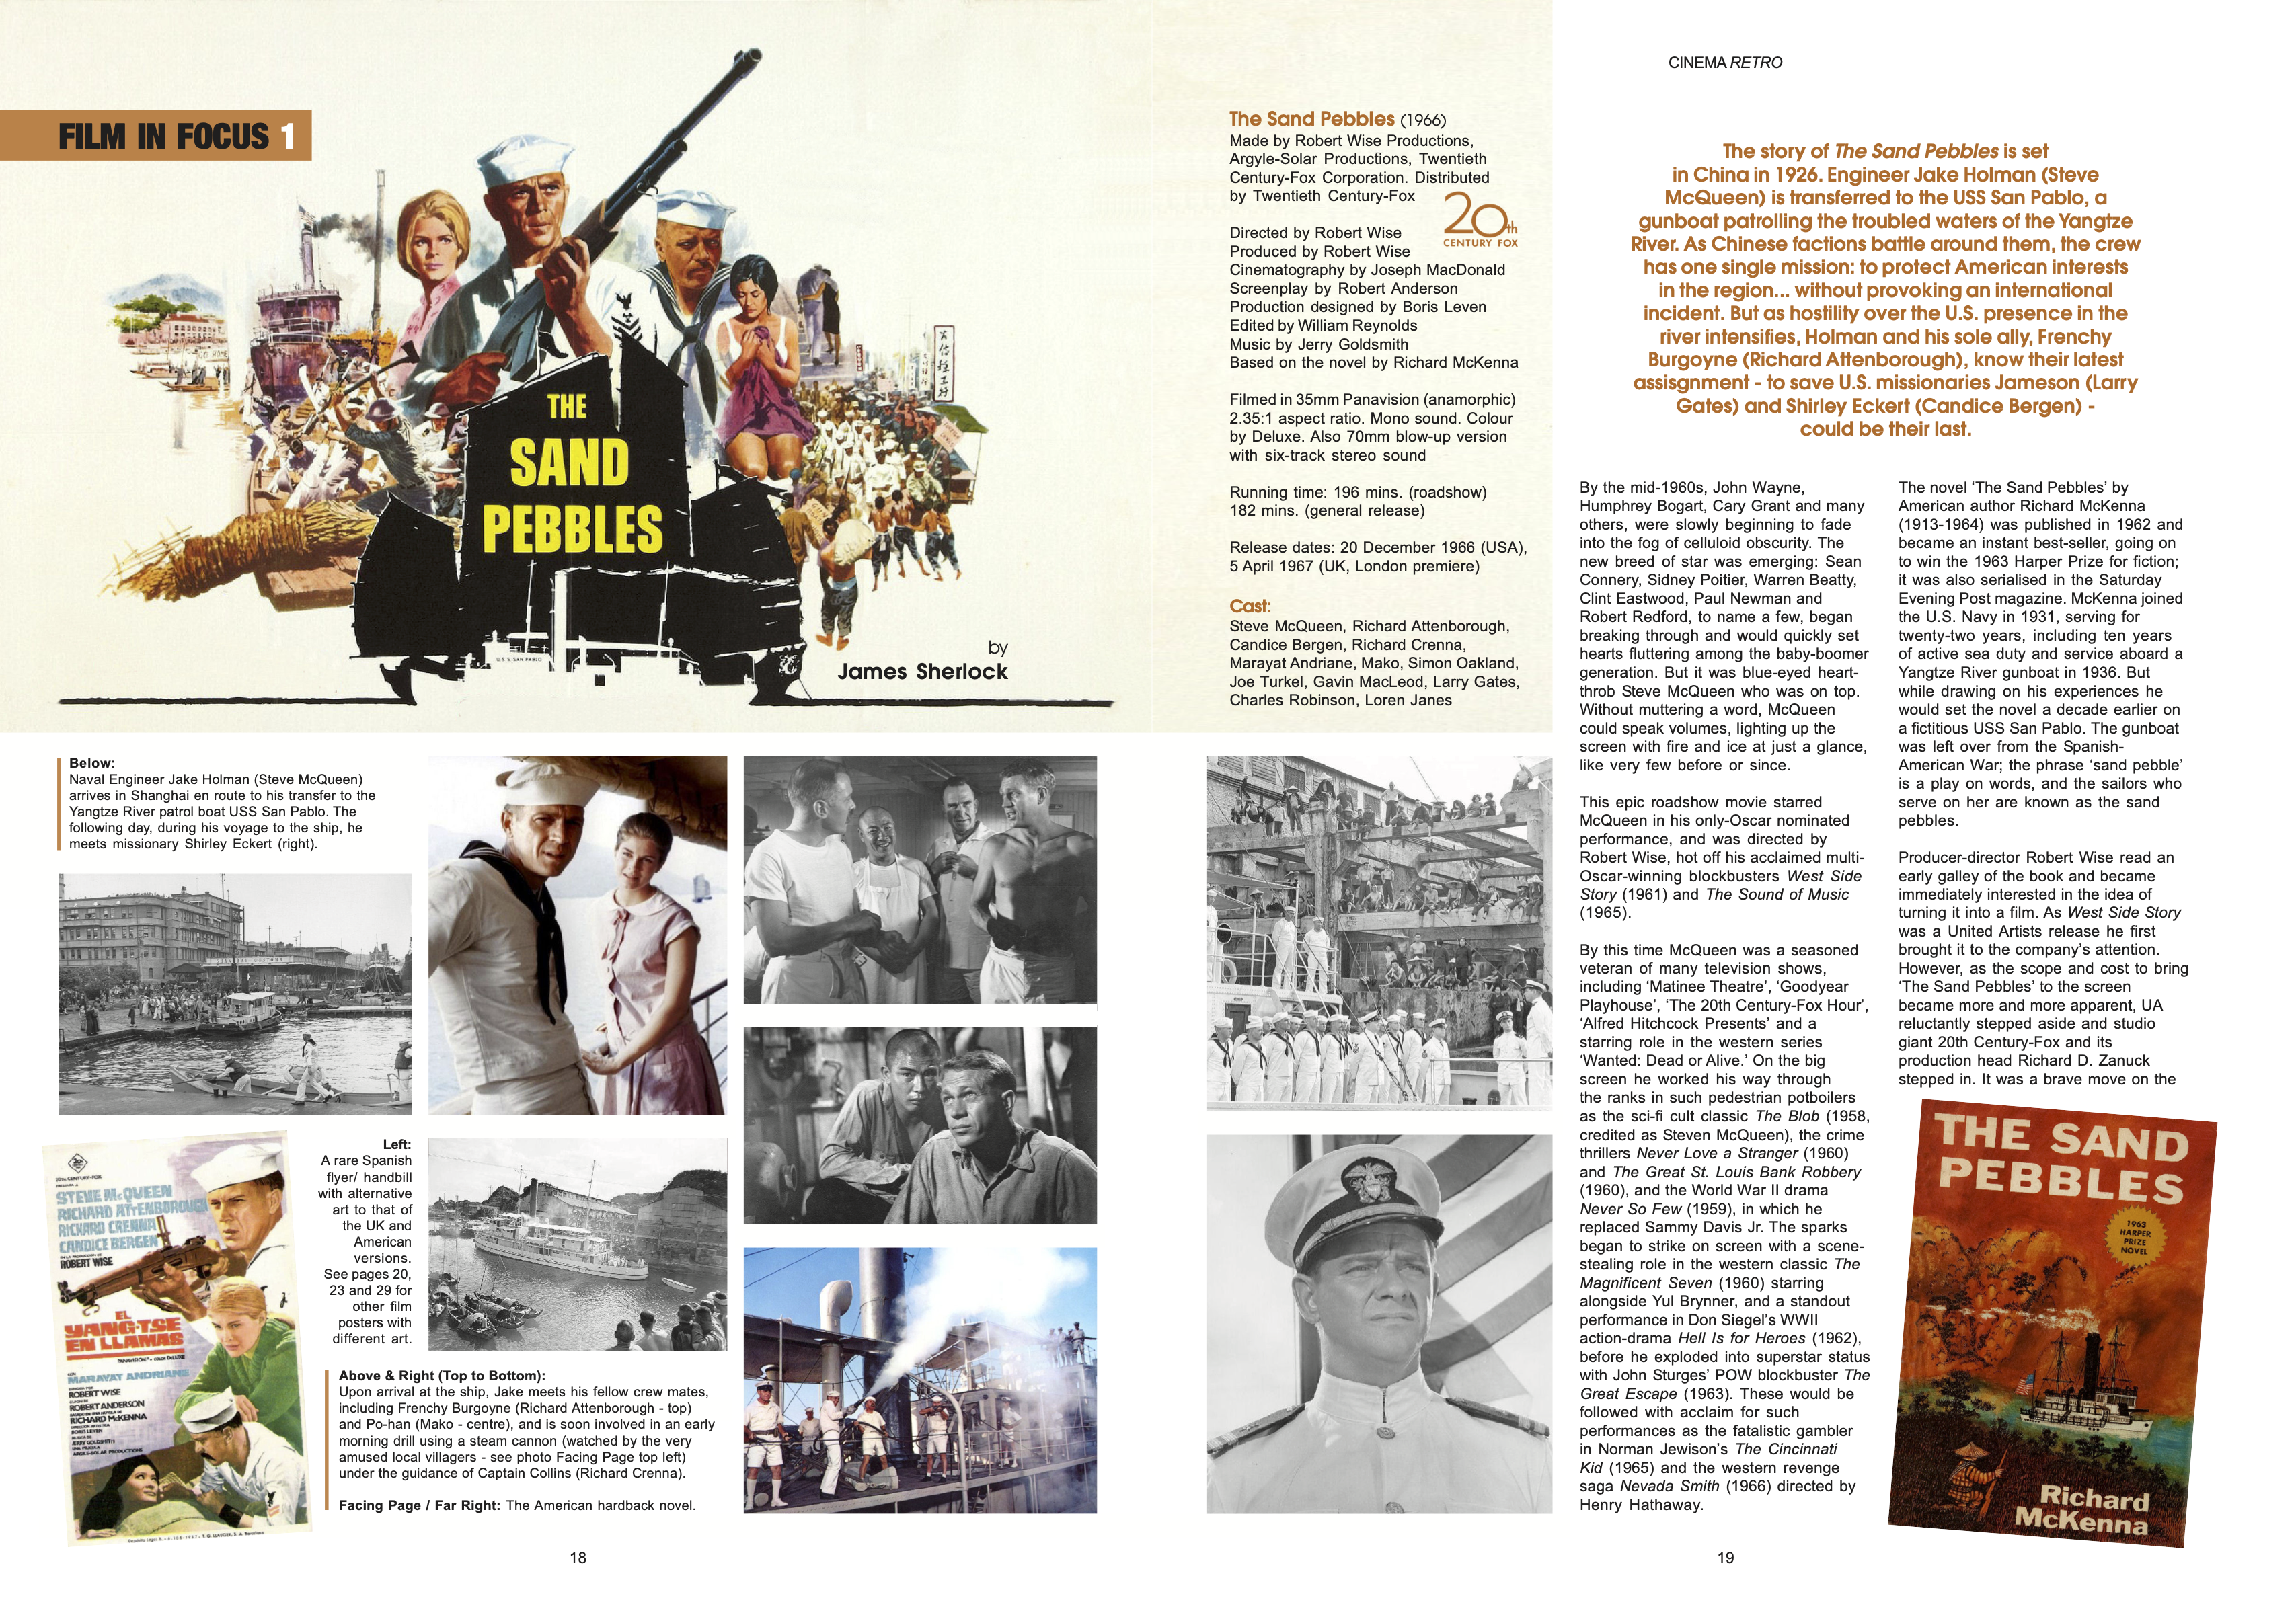 Cinema Retro Issue 52 Vol 18 Pages 18 & 19 - The Sand Pebbles - by James Sherlock